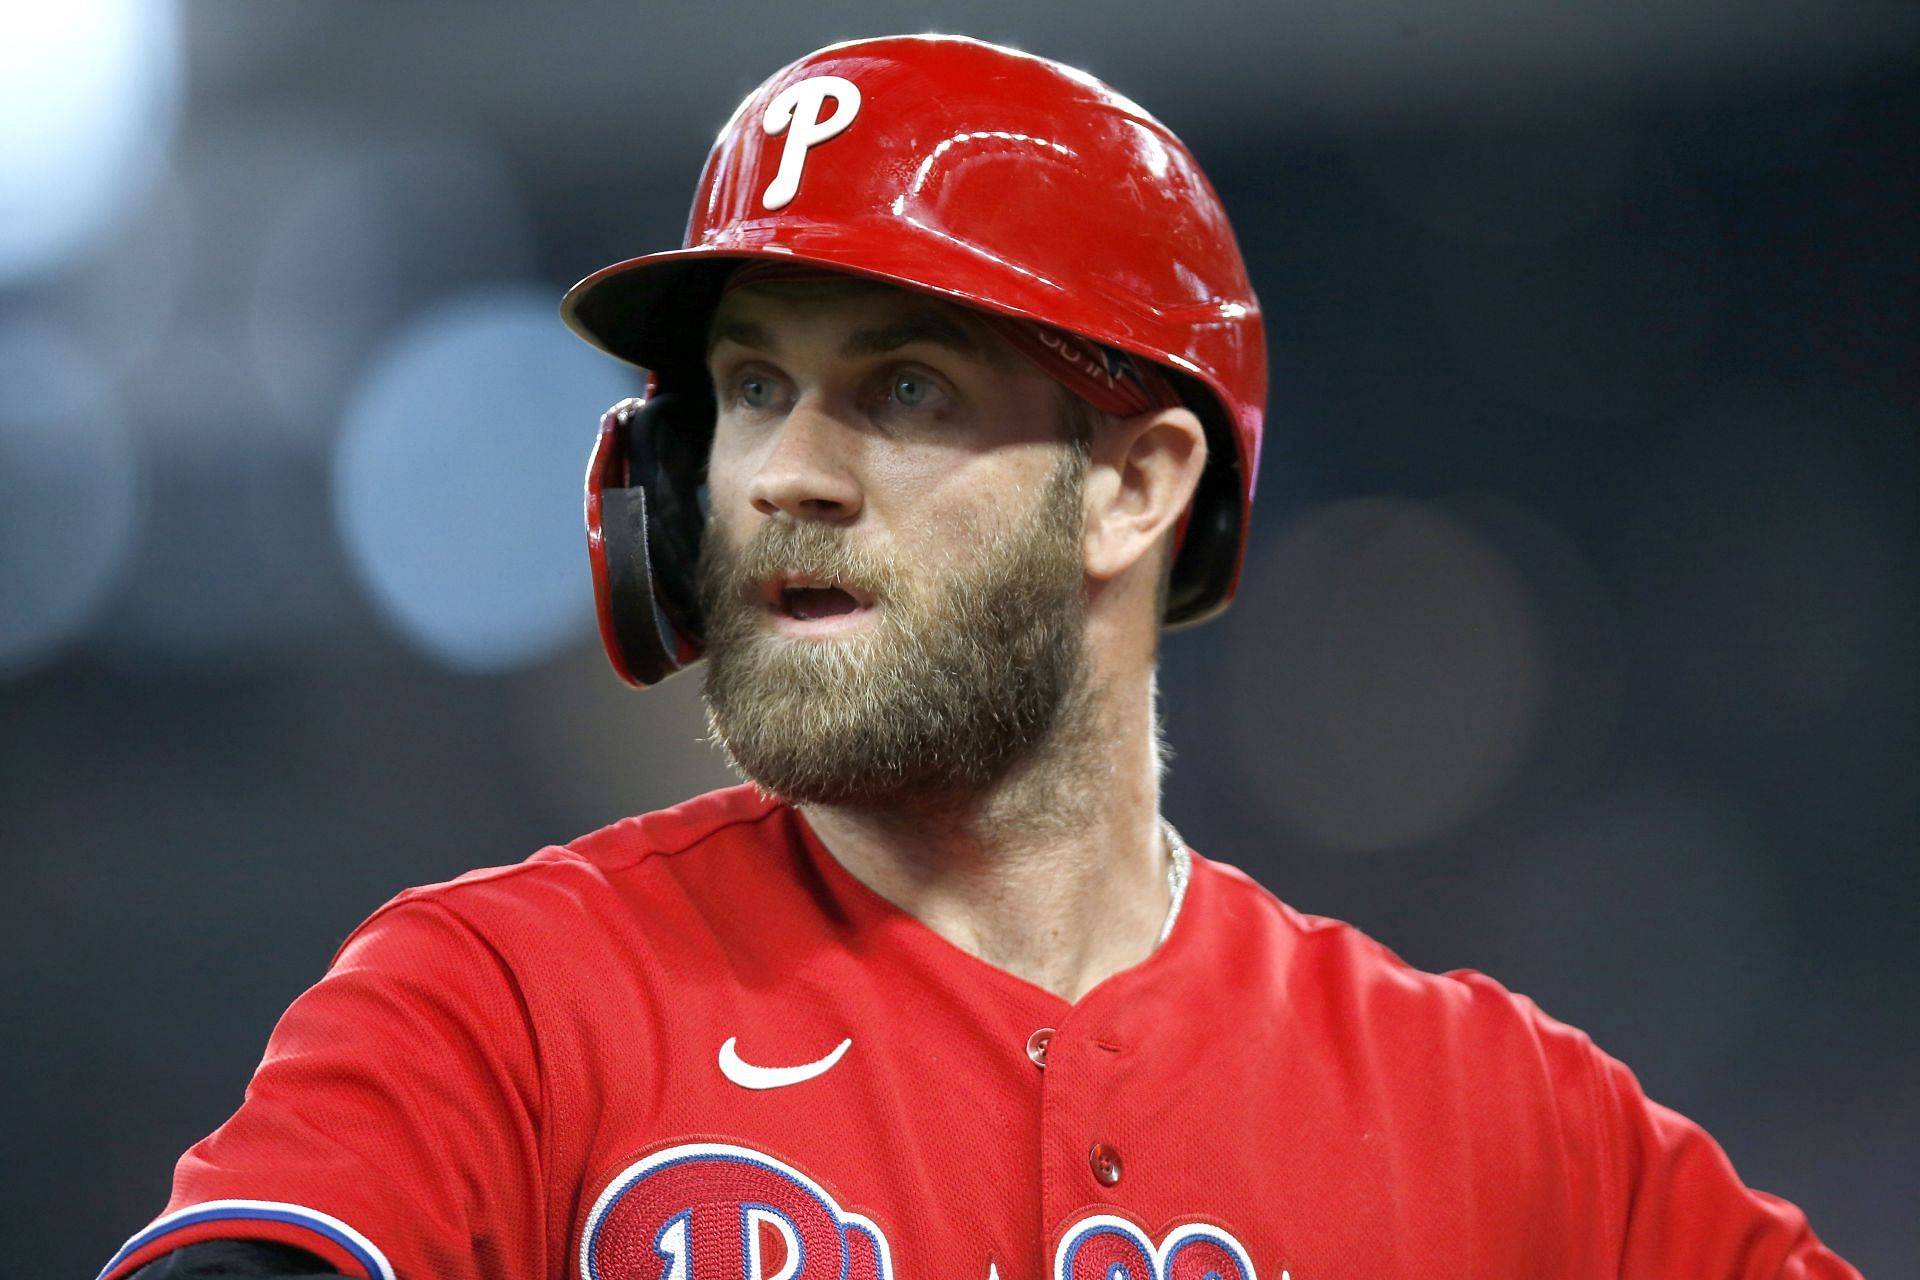 Bryce Harper makes the All-Star cut, despite being ruled out indefinitely.